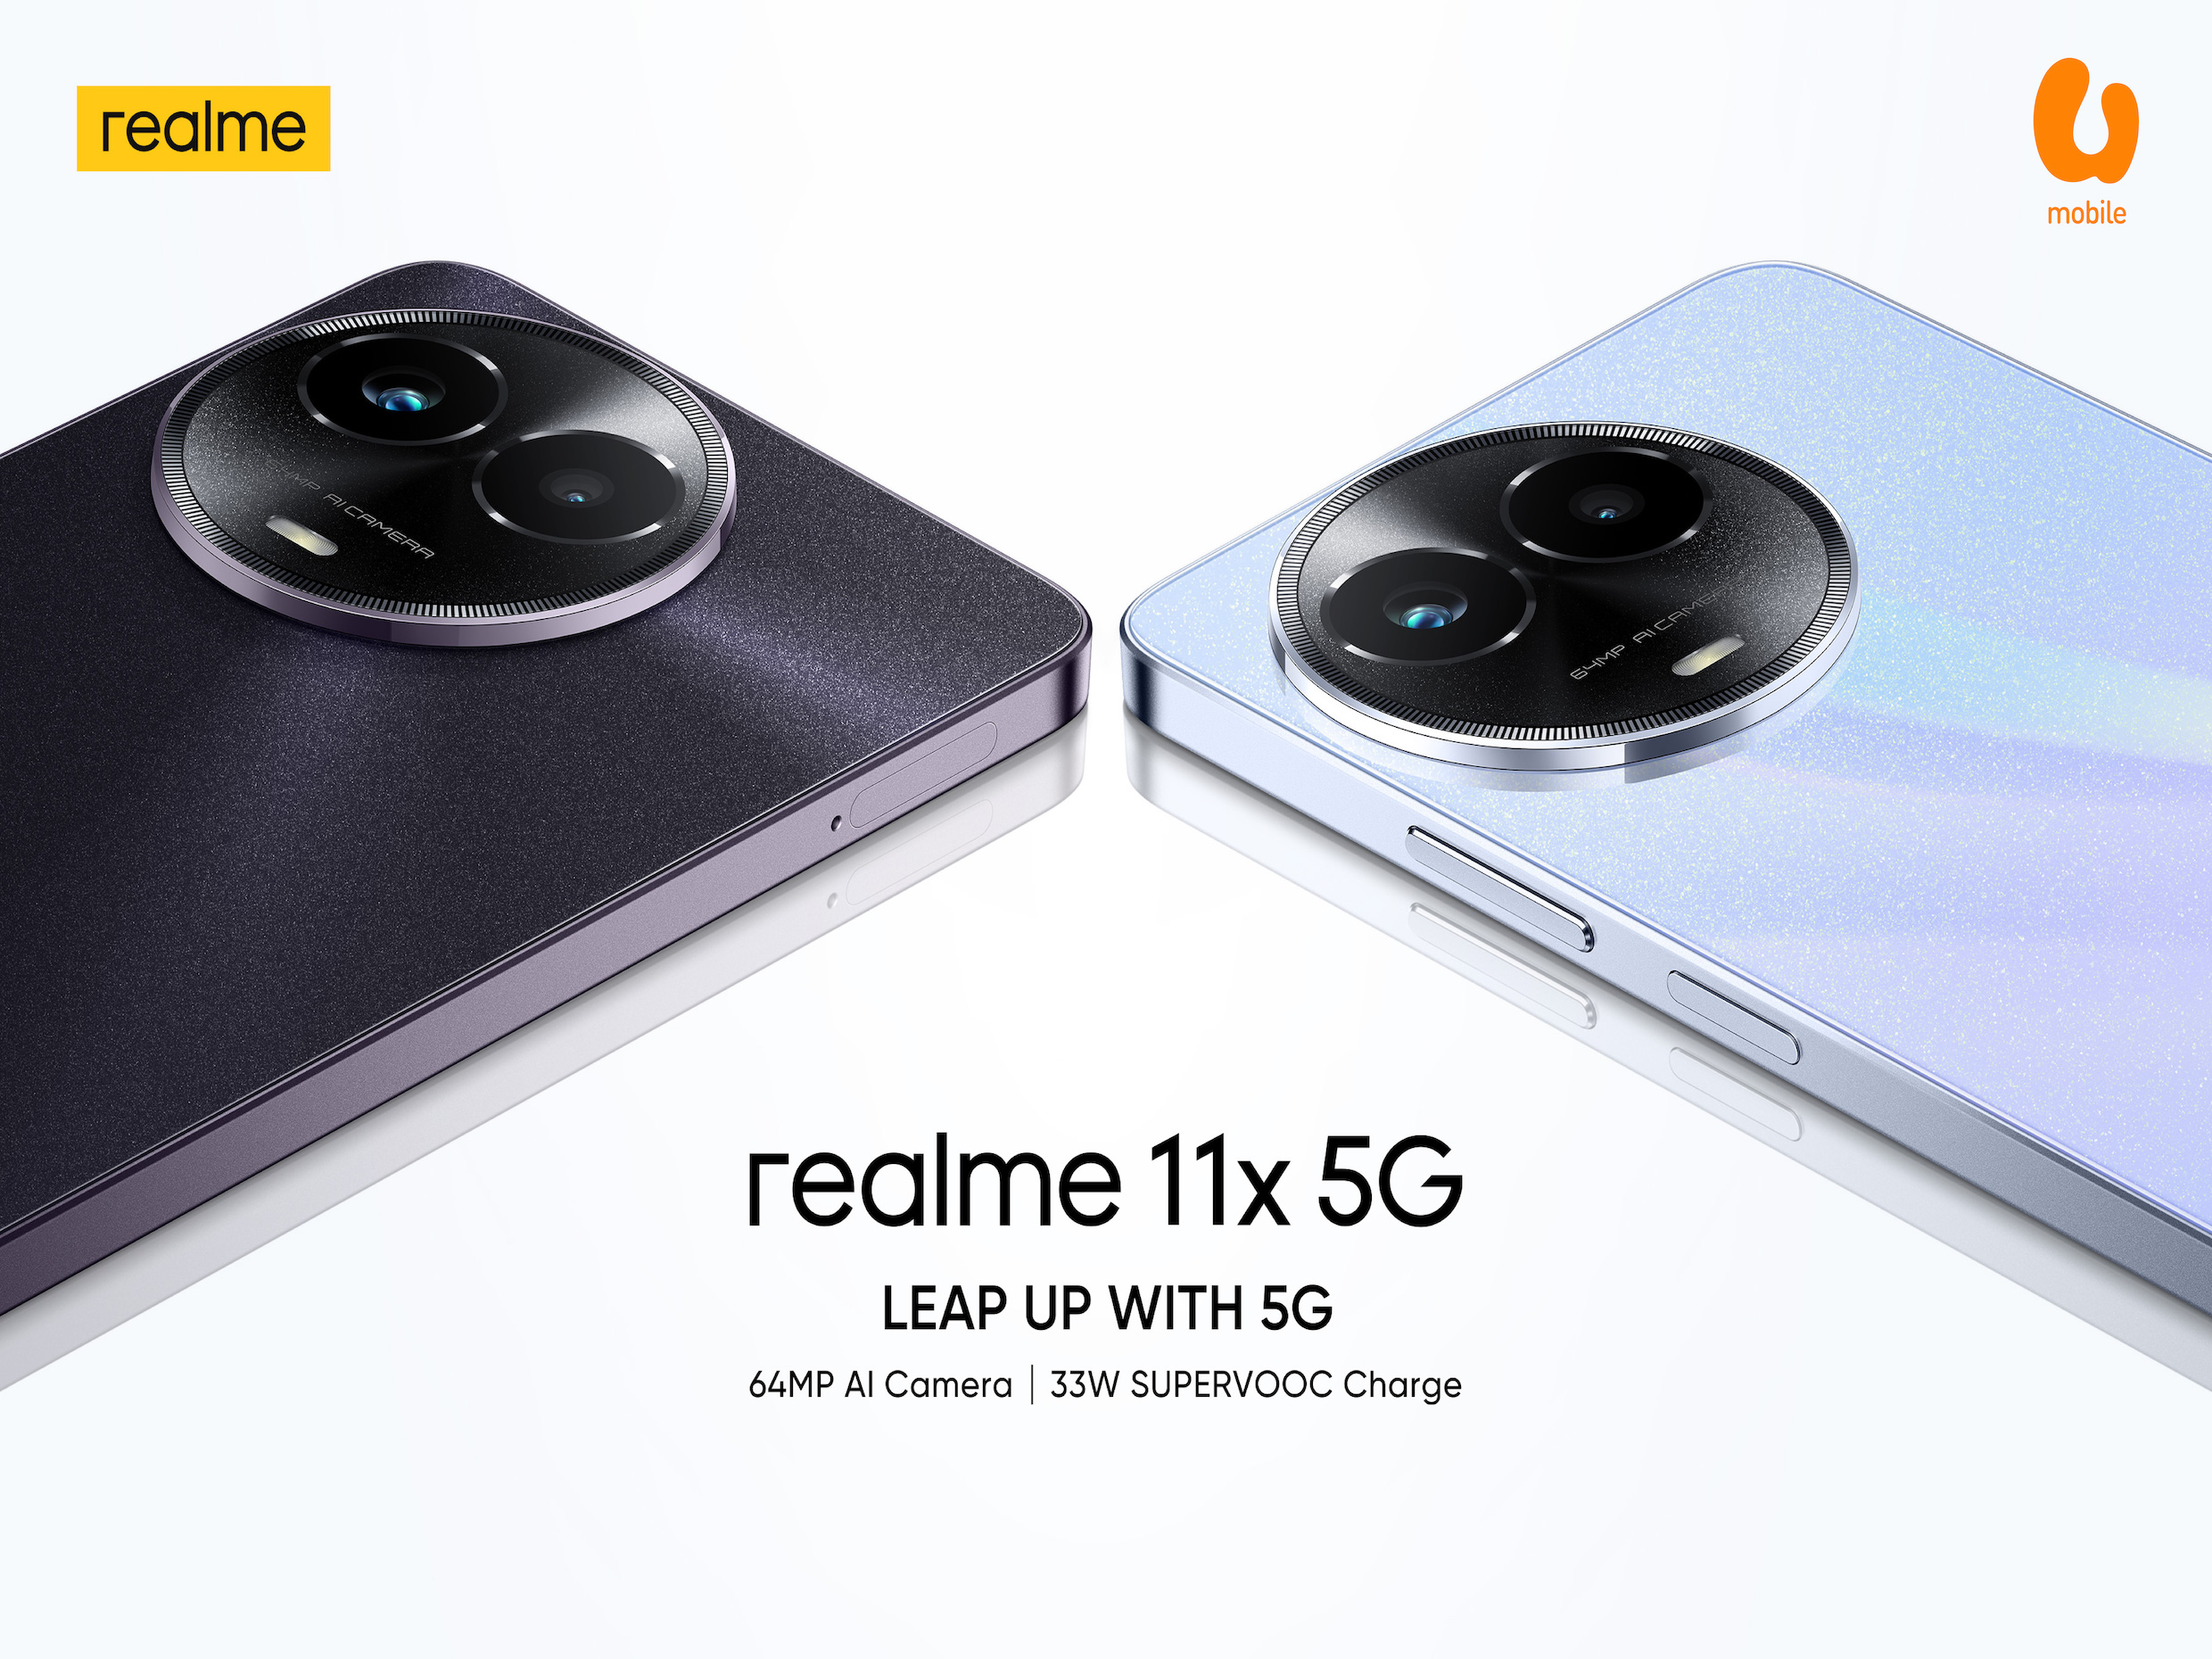 realme 11x 5G smartphone now available for Malaysians at U Mobile